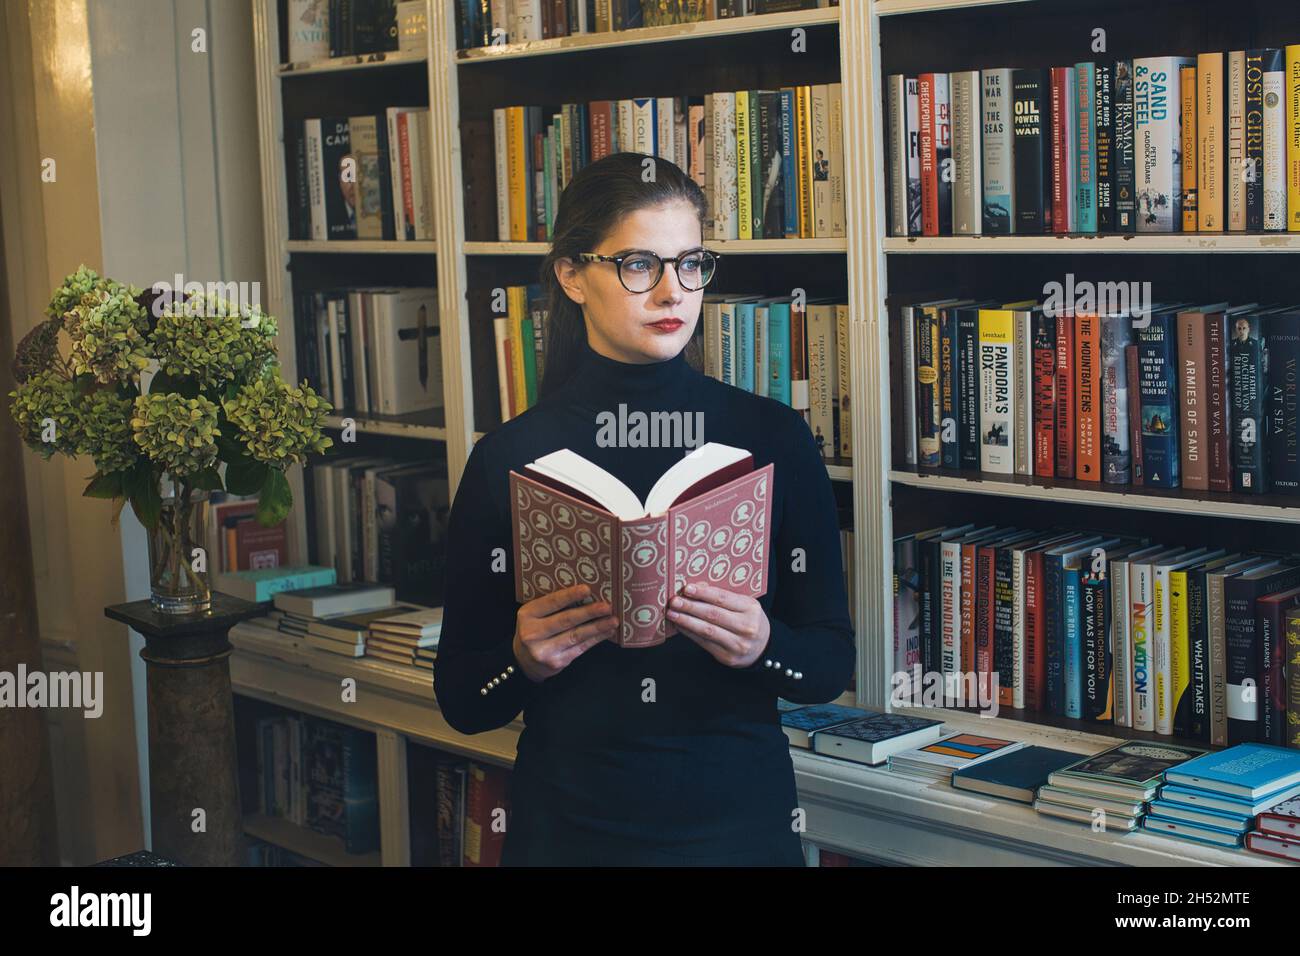 GREAT BRITAN / London / Bookstores / Beautiful woman reading a book in a bookstore. Stock Photo